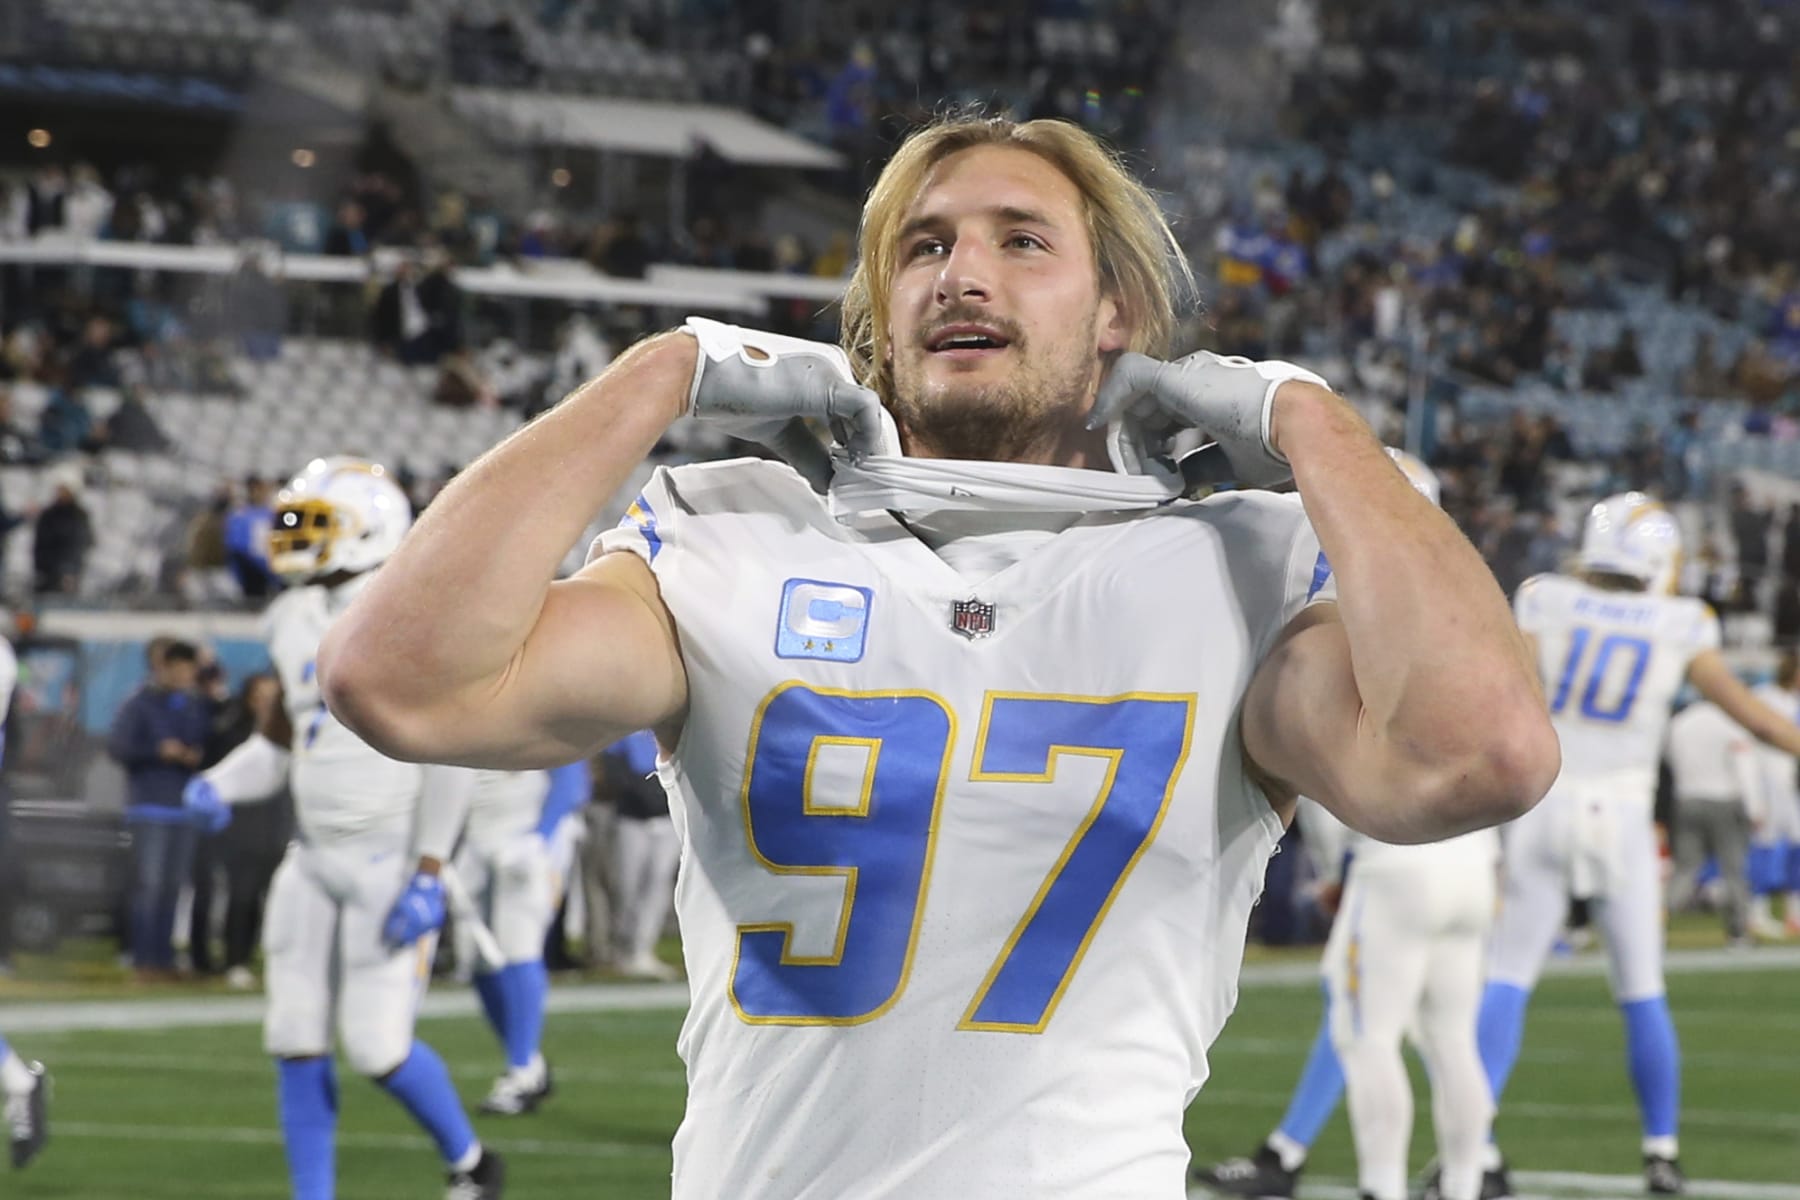 Bleacher Report - The Bosa family is taking over. Defensive Player